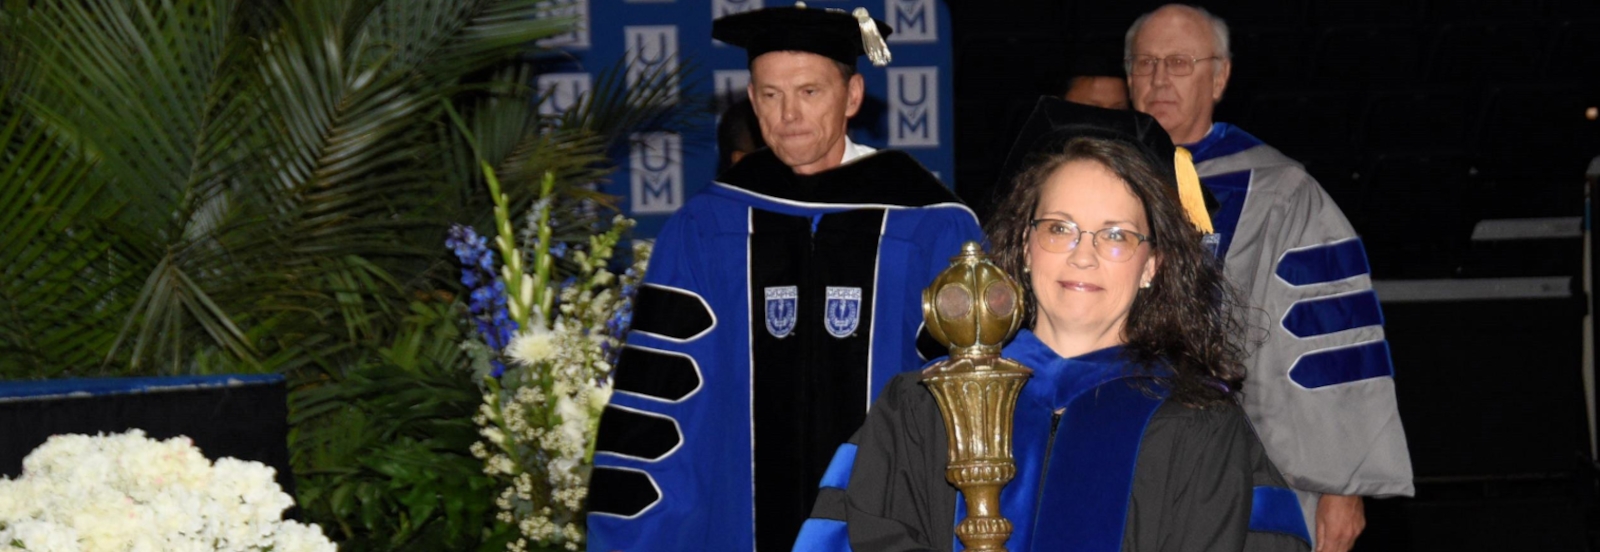 Faculty Senate President with Mace at Commencement